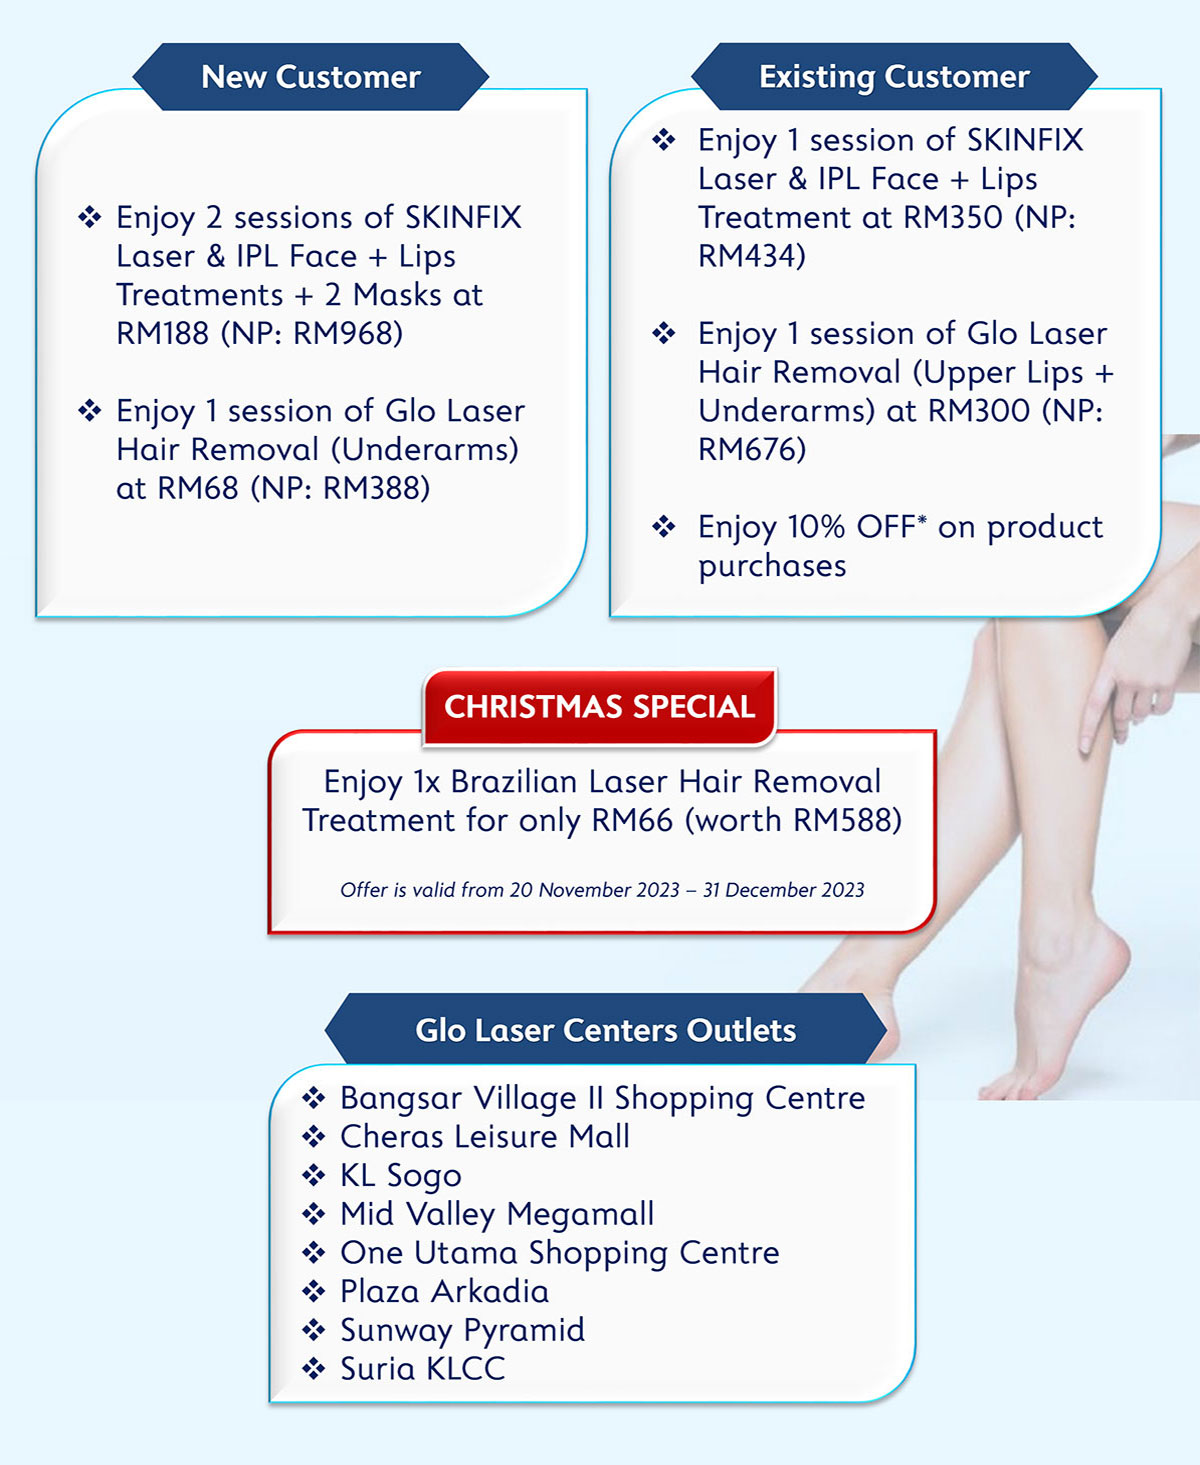 Enjoy special beauty and treatment CHRISTMAS SPECIAL offers at Glo Laser Centre